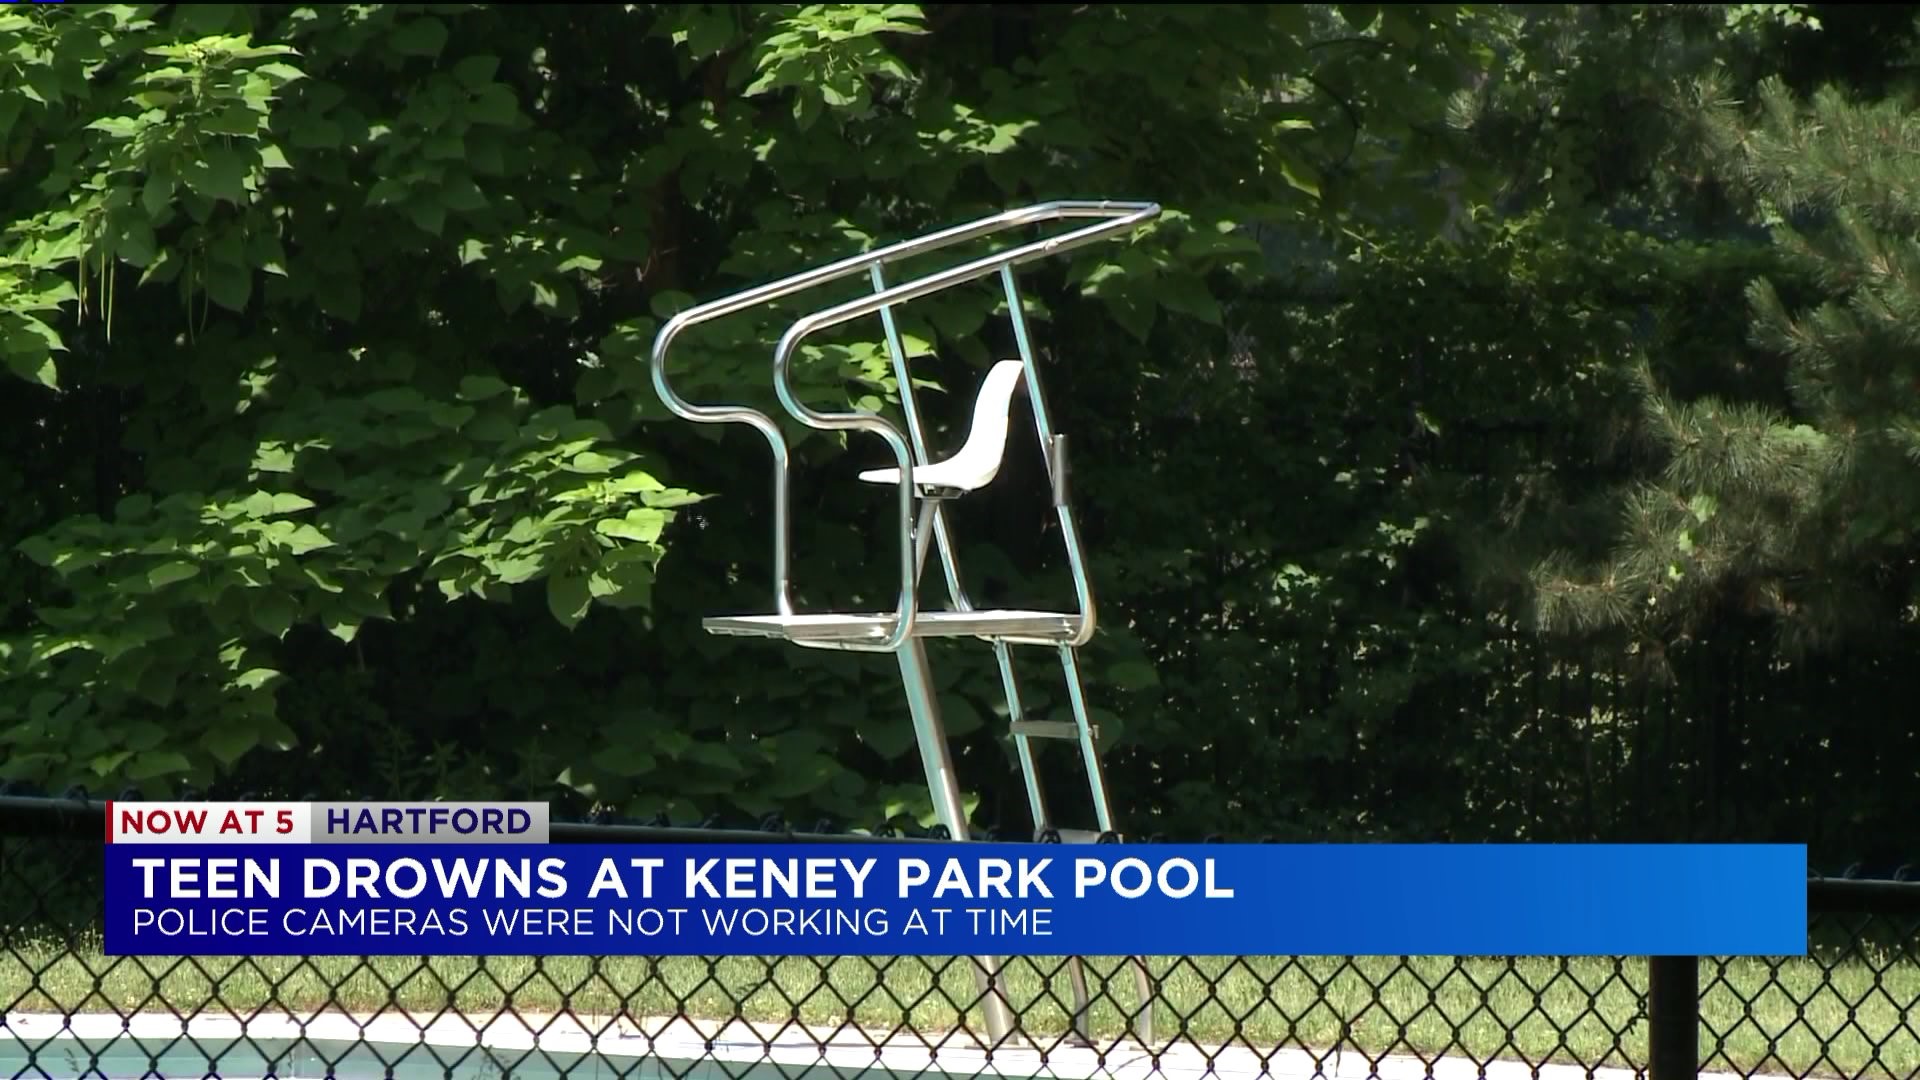 Teen drowns in pool, security system not working